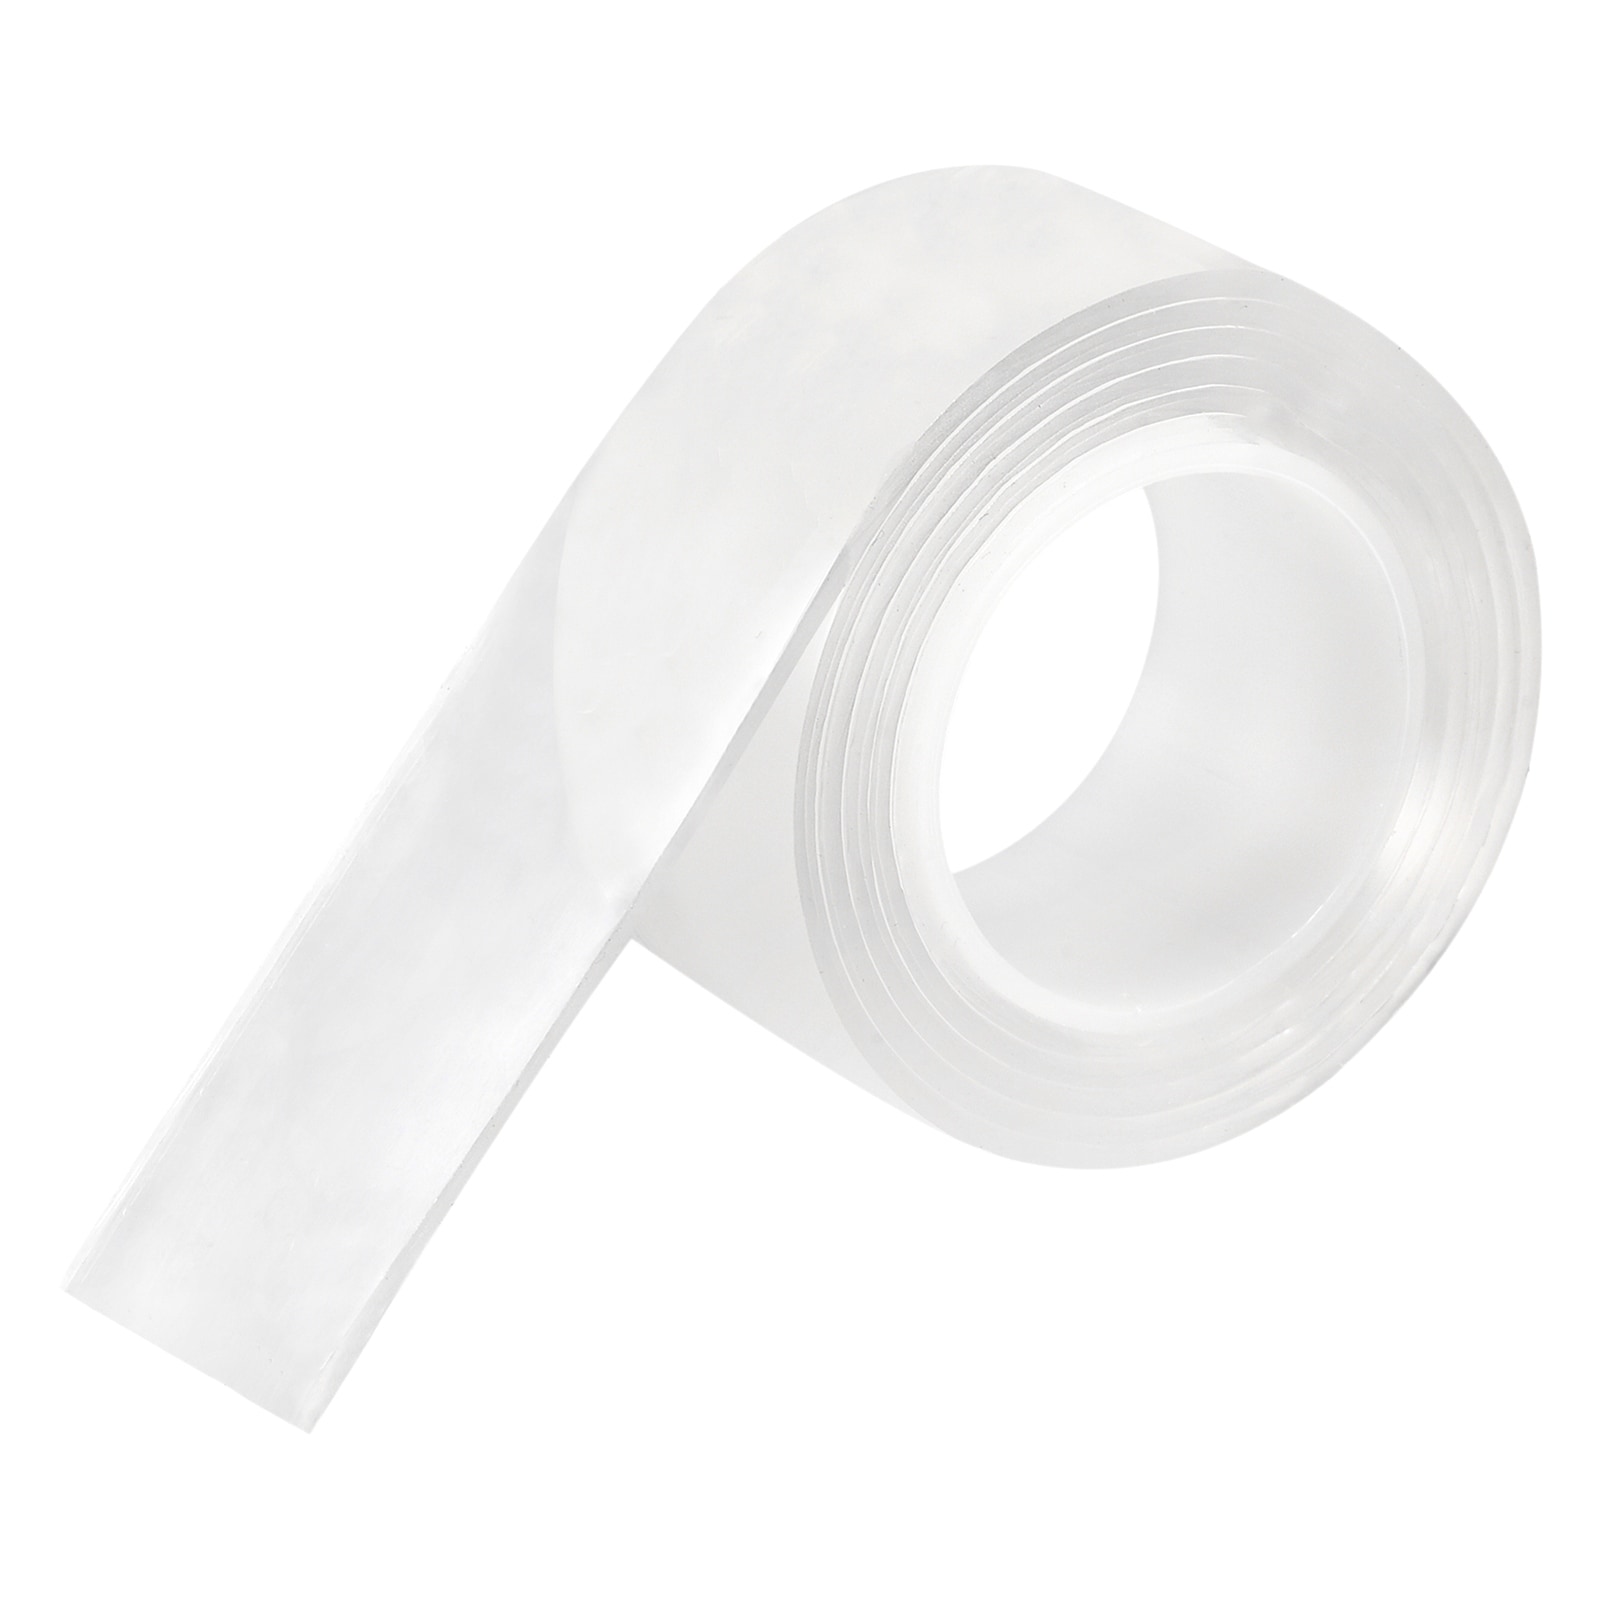 Double Sided Tape-1000x30x2mm Strong Adhesive Tape for Wall, 4pcs Tape - Transparent